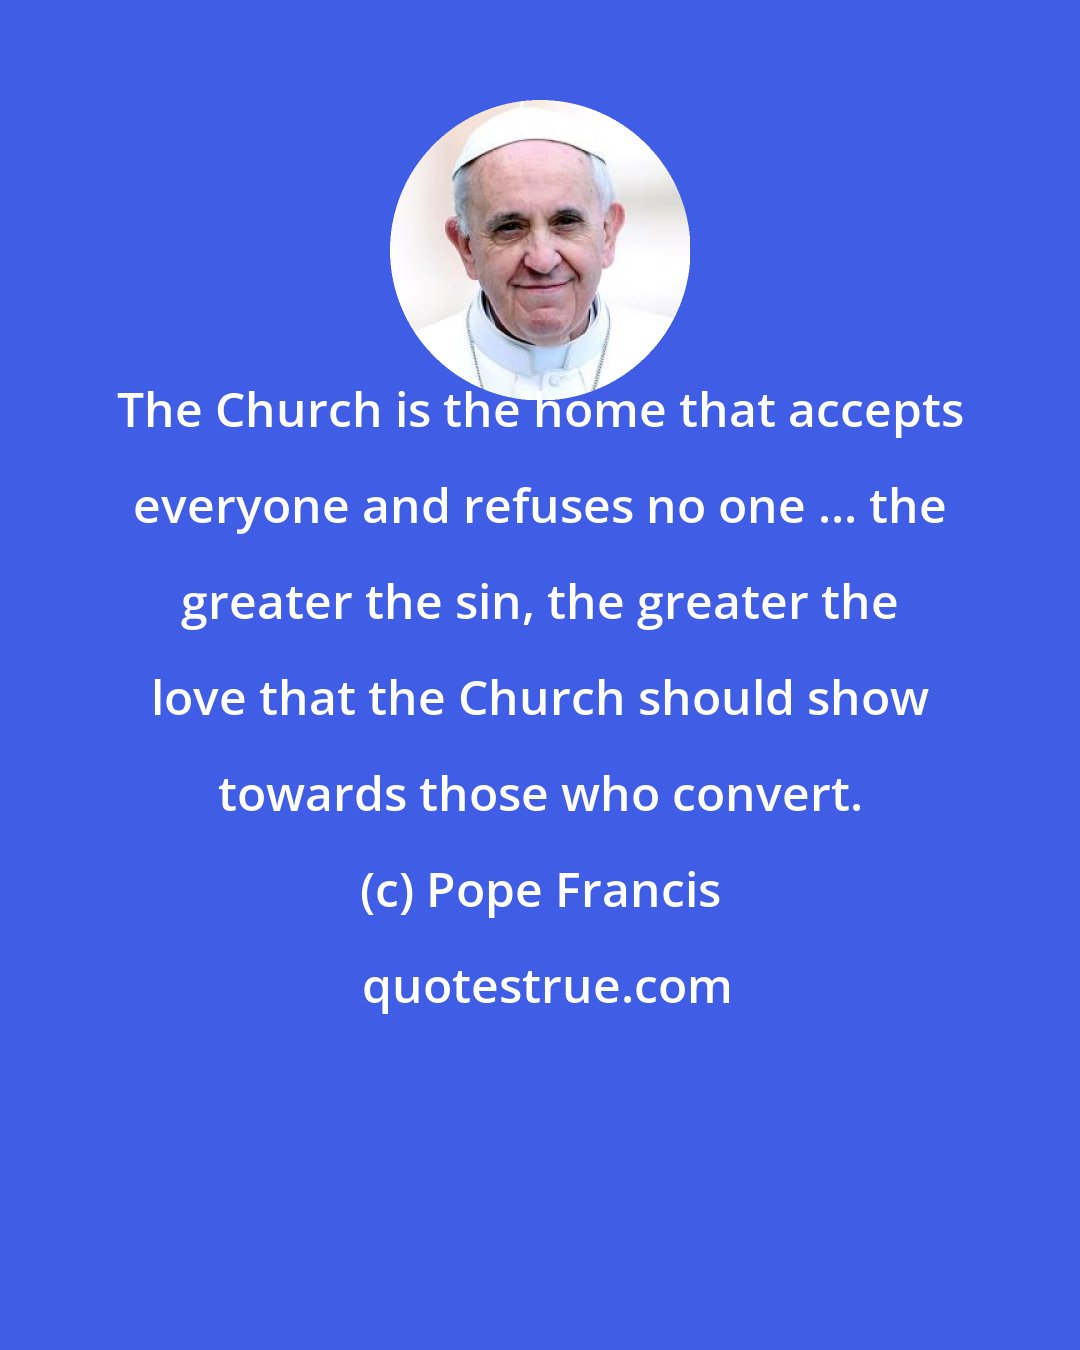 Pope Francis: The Church is the home that accepts everyone and refuses no one ... the greater the sin, the greater the love that the Church should show towards those who convert.